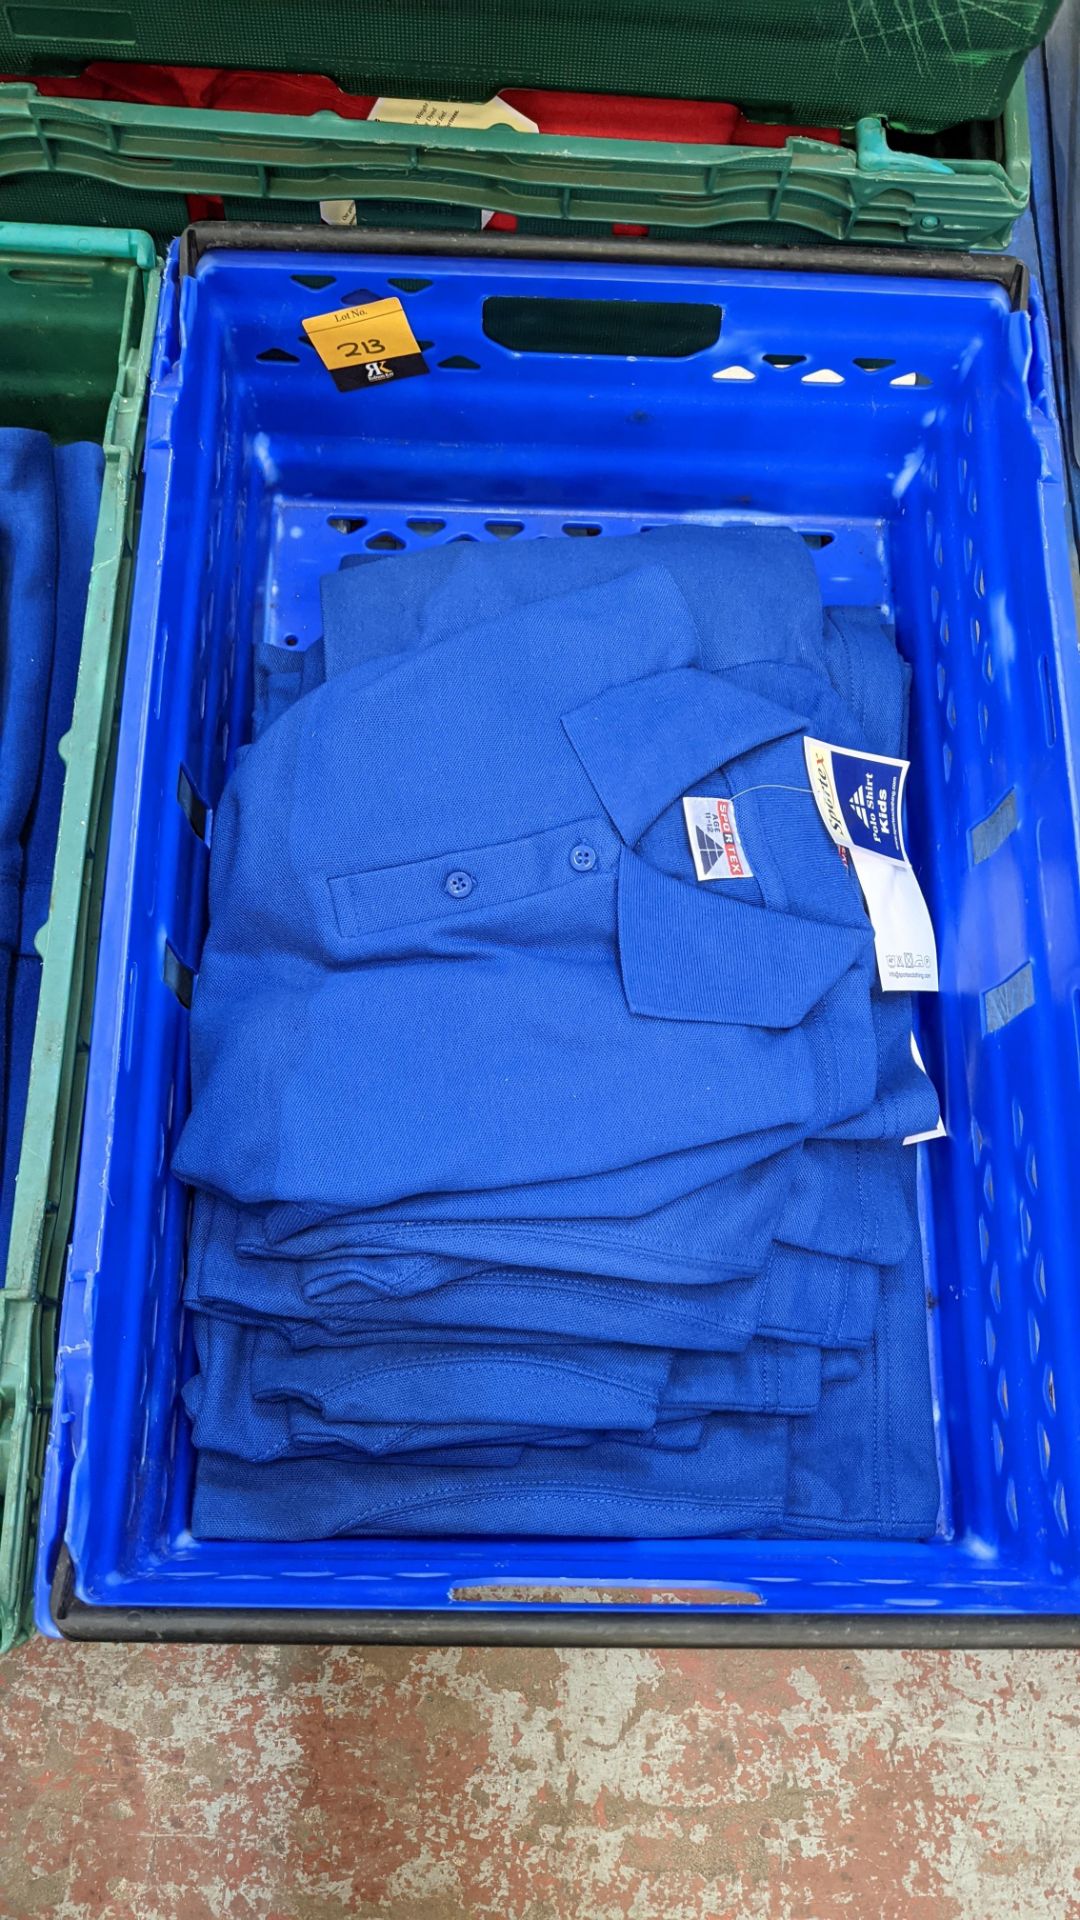 Approx 12 off Sportex children's blue polo shirts - the contents of 1 crate. NB crate excluded